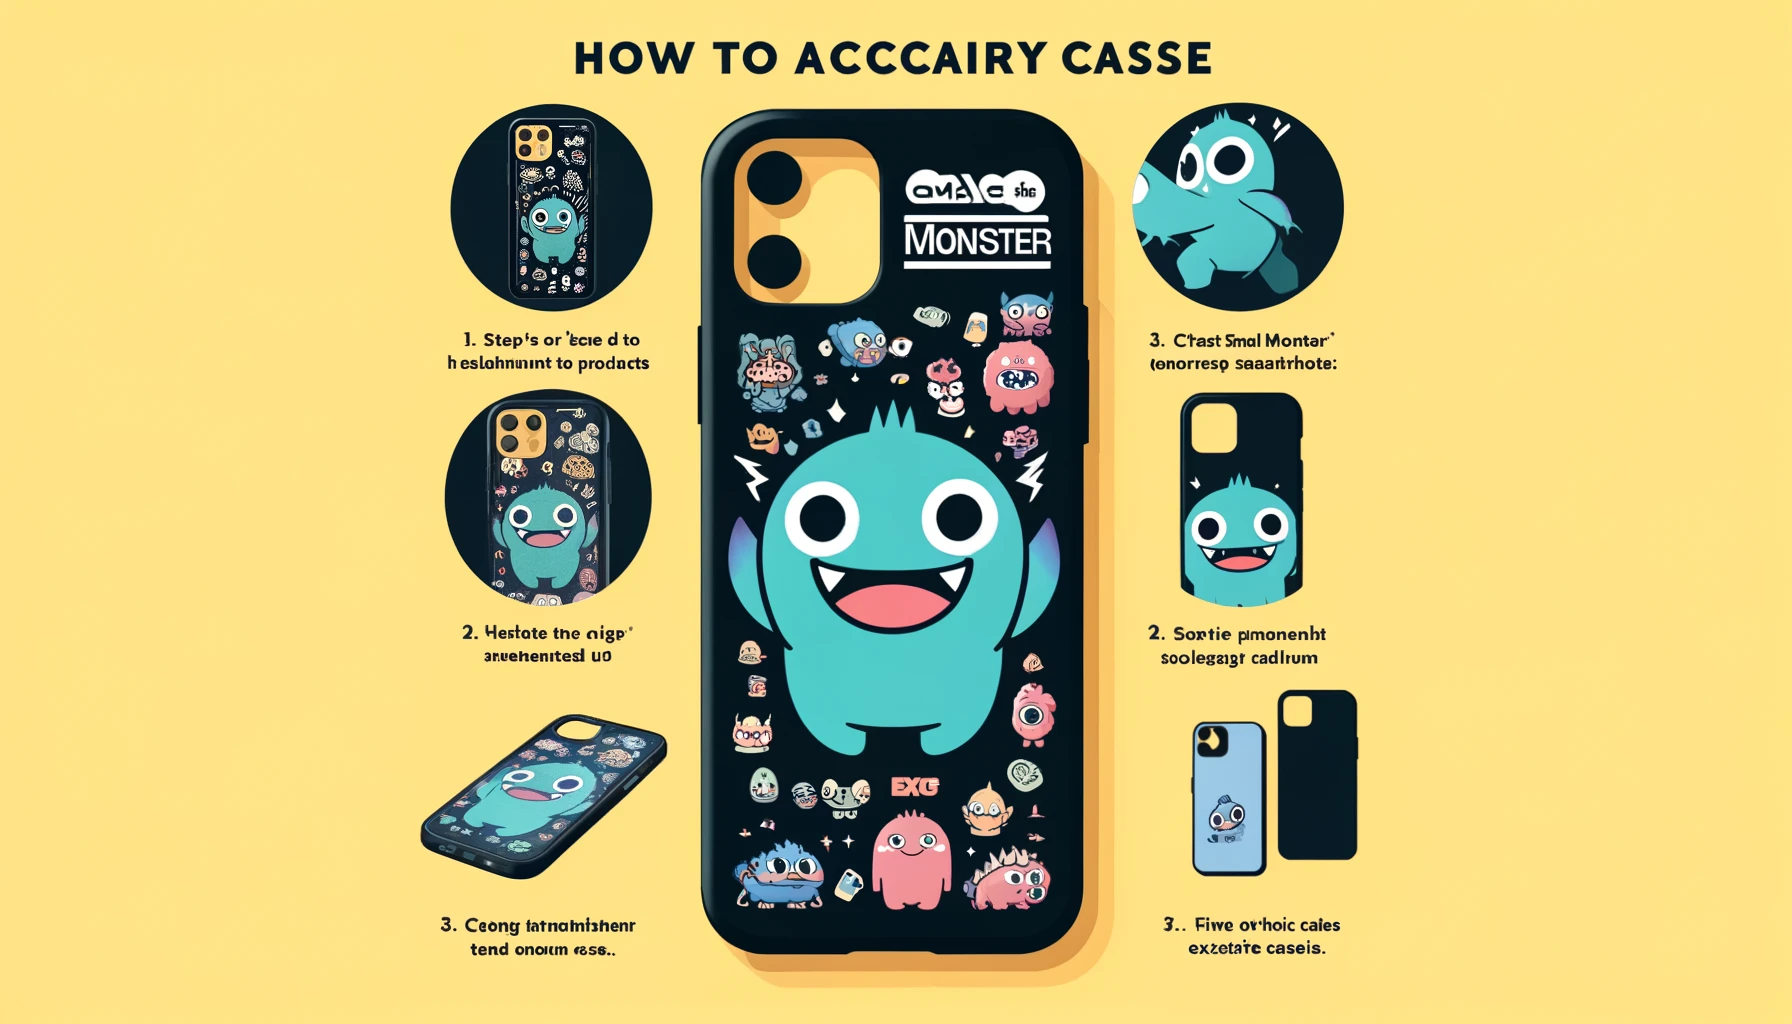 An informative image showing how to obtain CASETiFY smartphone cases featuring small monster anime character collaboration products. The design should clearly display steps or methods to acquire these exclusive cases. The word 'CASE' should be prominently displayed on the image.